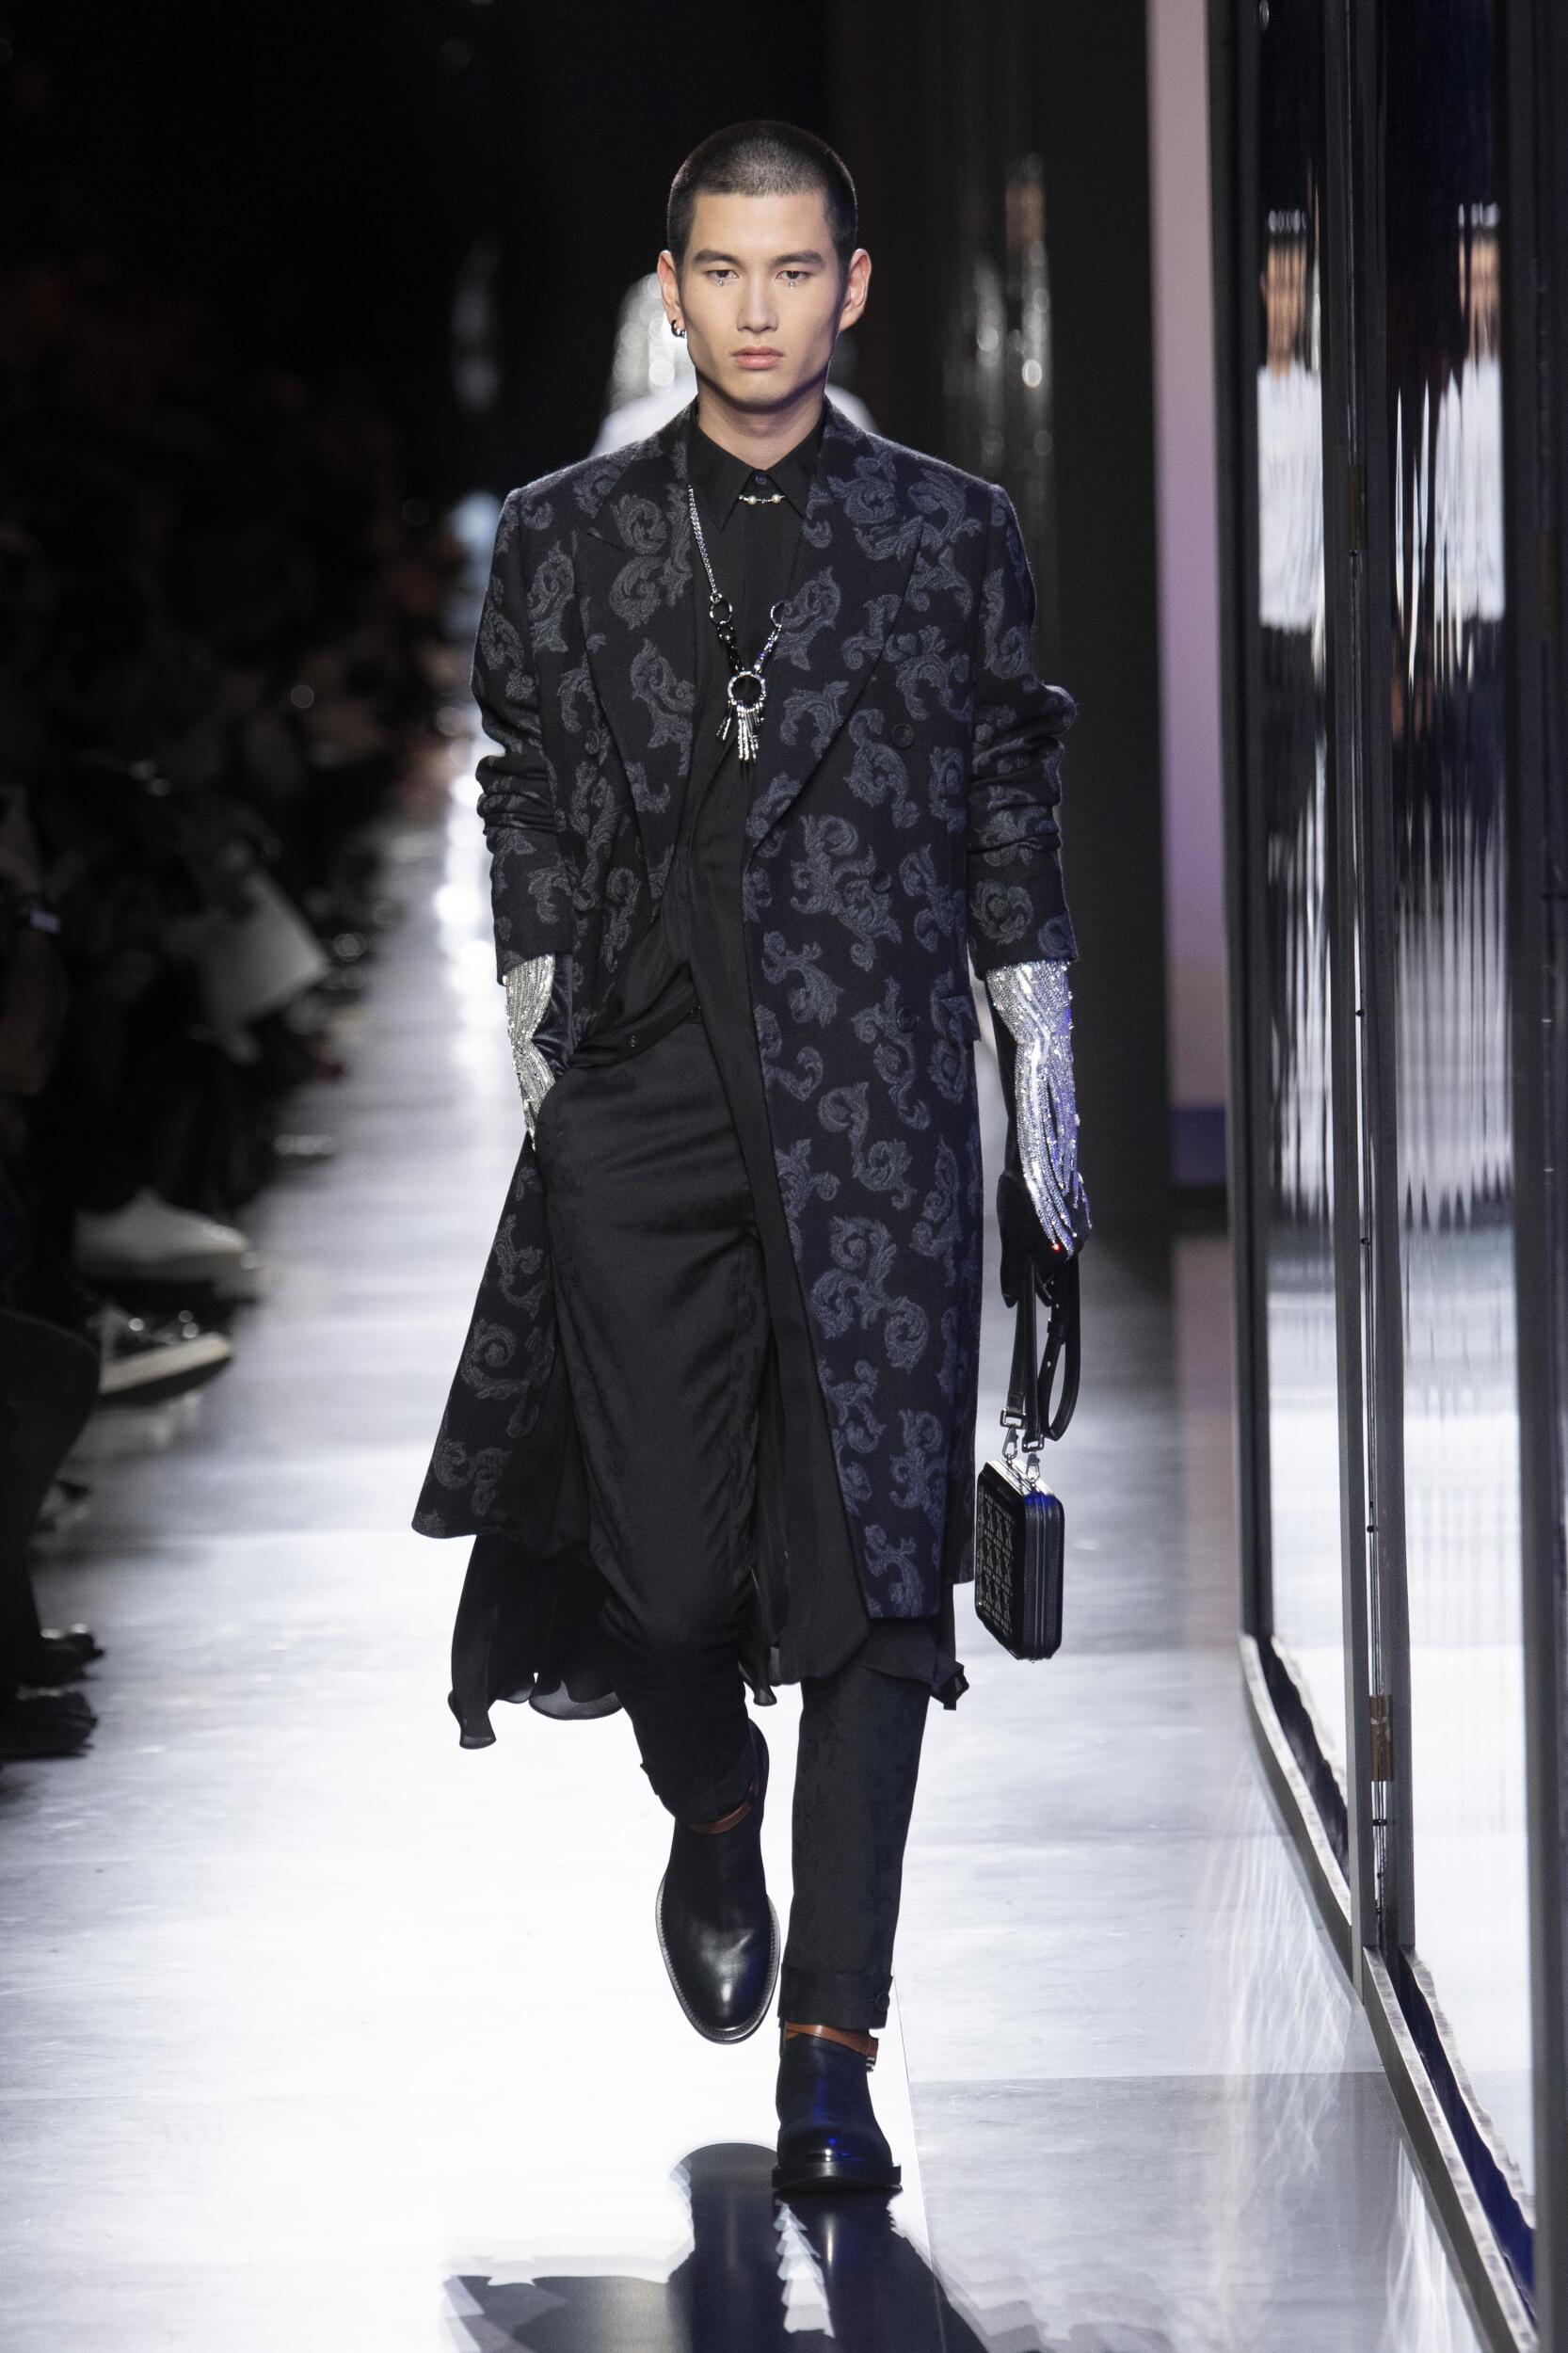 DIOR FALL WINTER 2020 MEN’S COLLECTION | The Skinny Beep